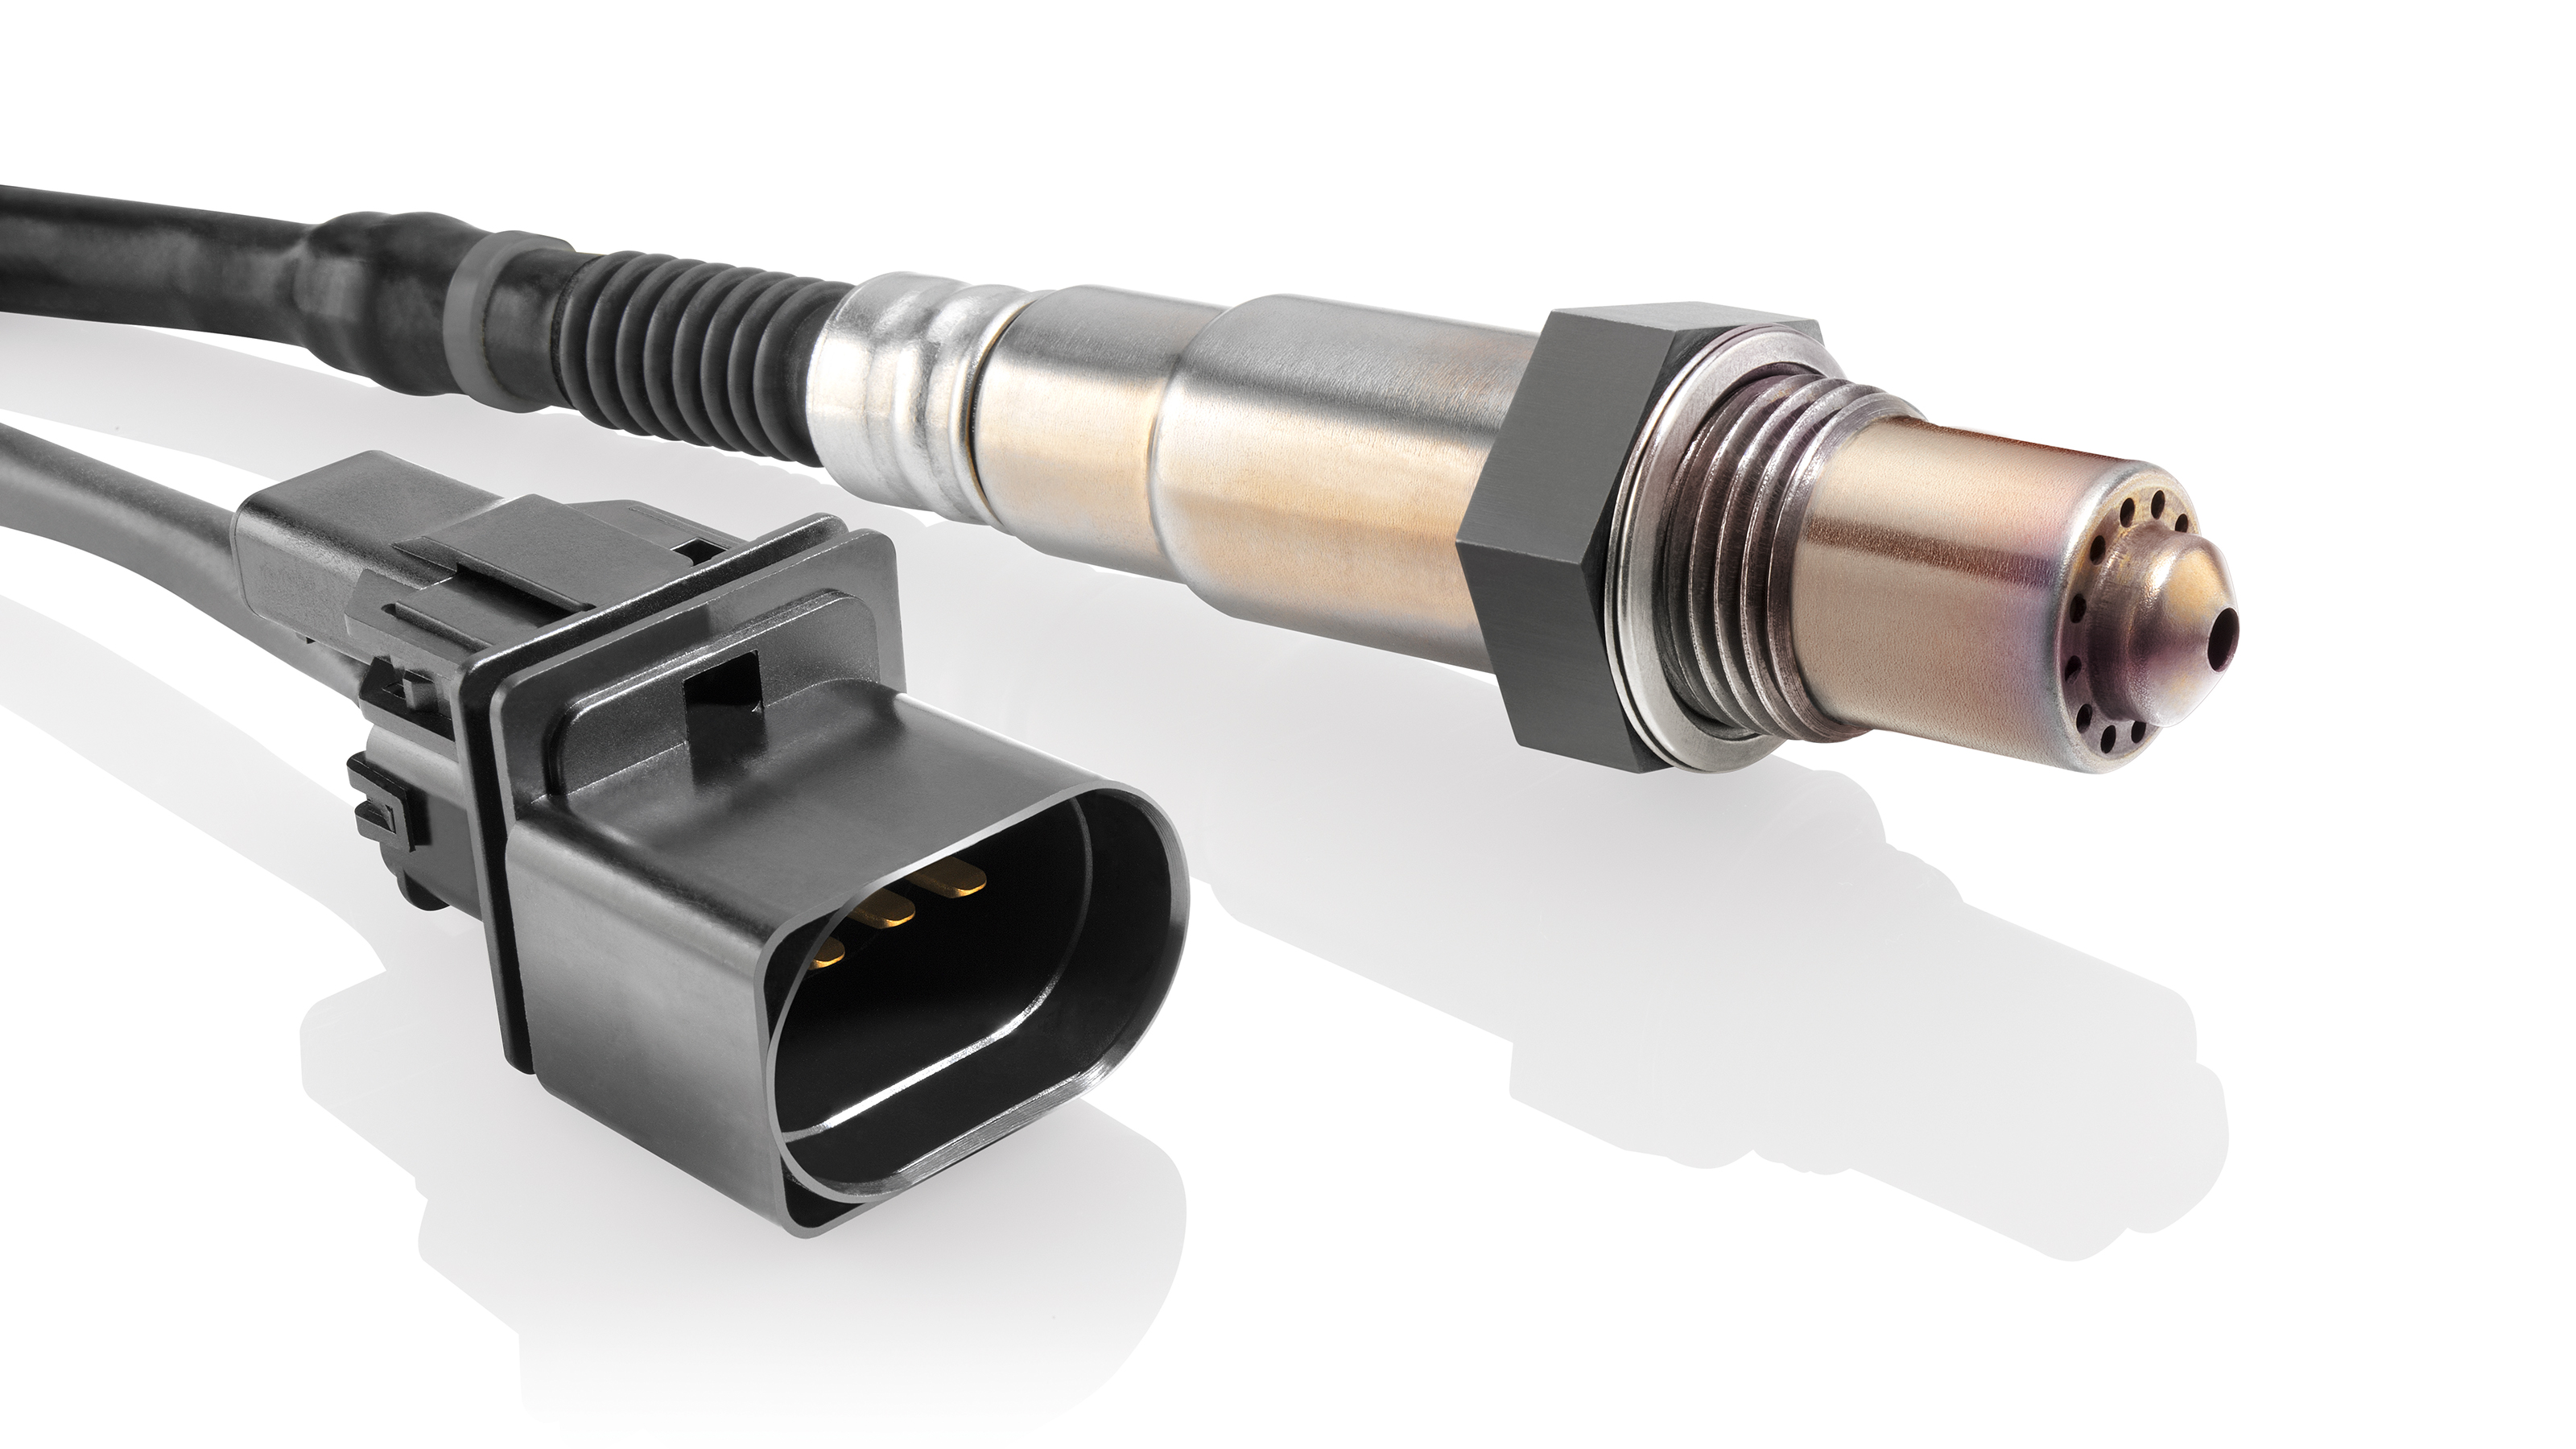 https://www.boschaftermarket.com/xrm/media/images/country_specific/in/parts_11/sensors_1/oxygen_sensor_with_vehicle-specific_connector.jpg